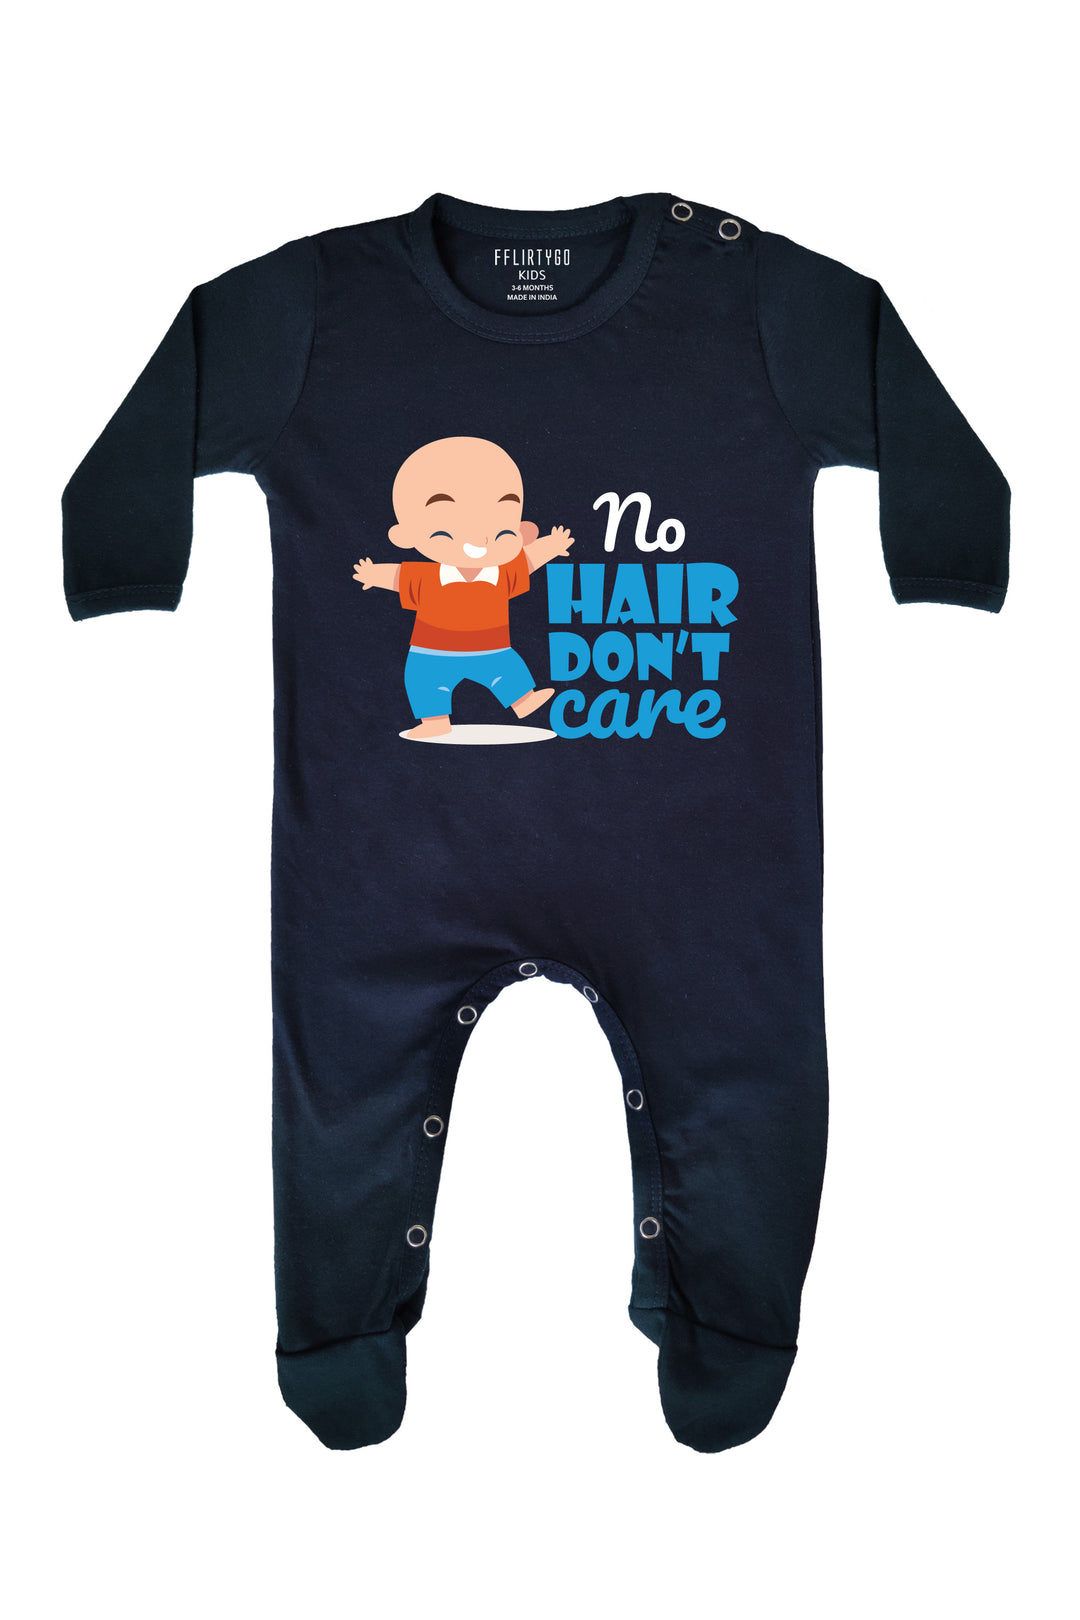 No Hair - Don't Care Baby Romper | Onesies